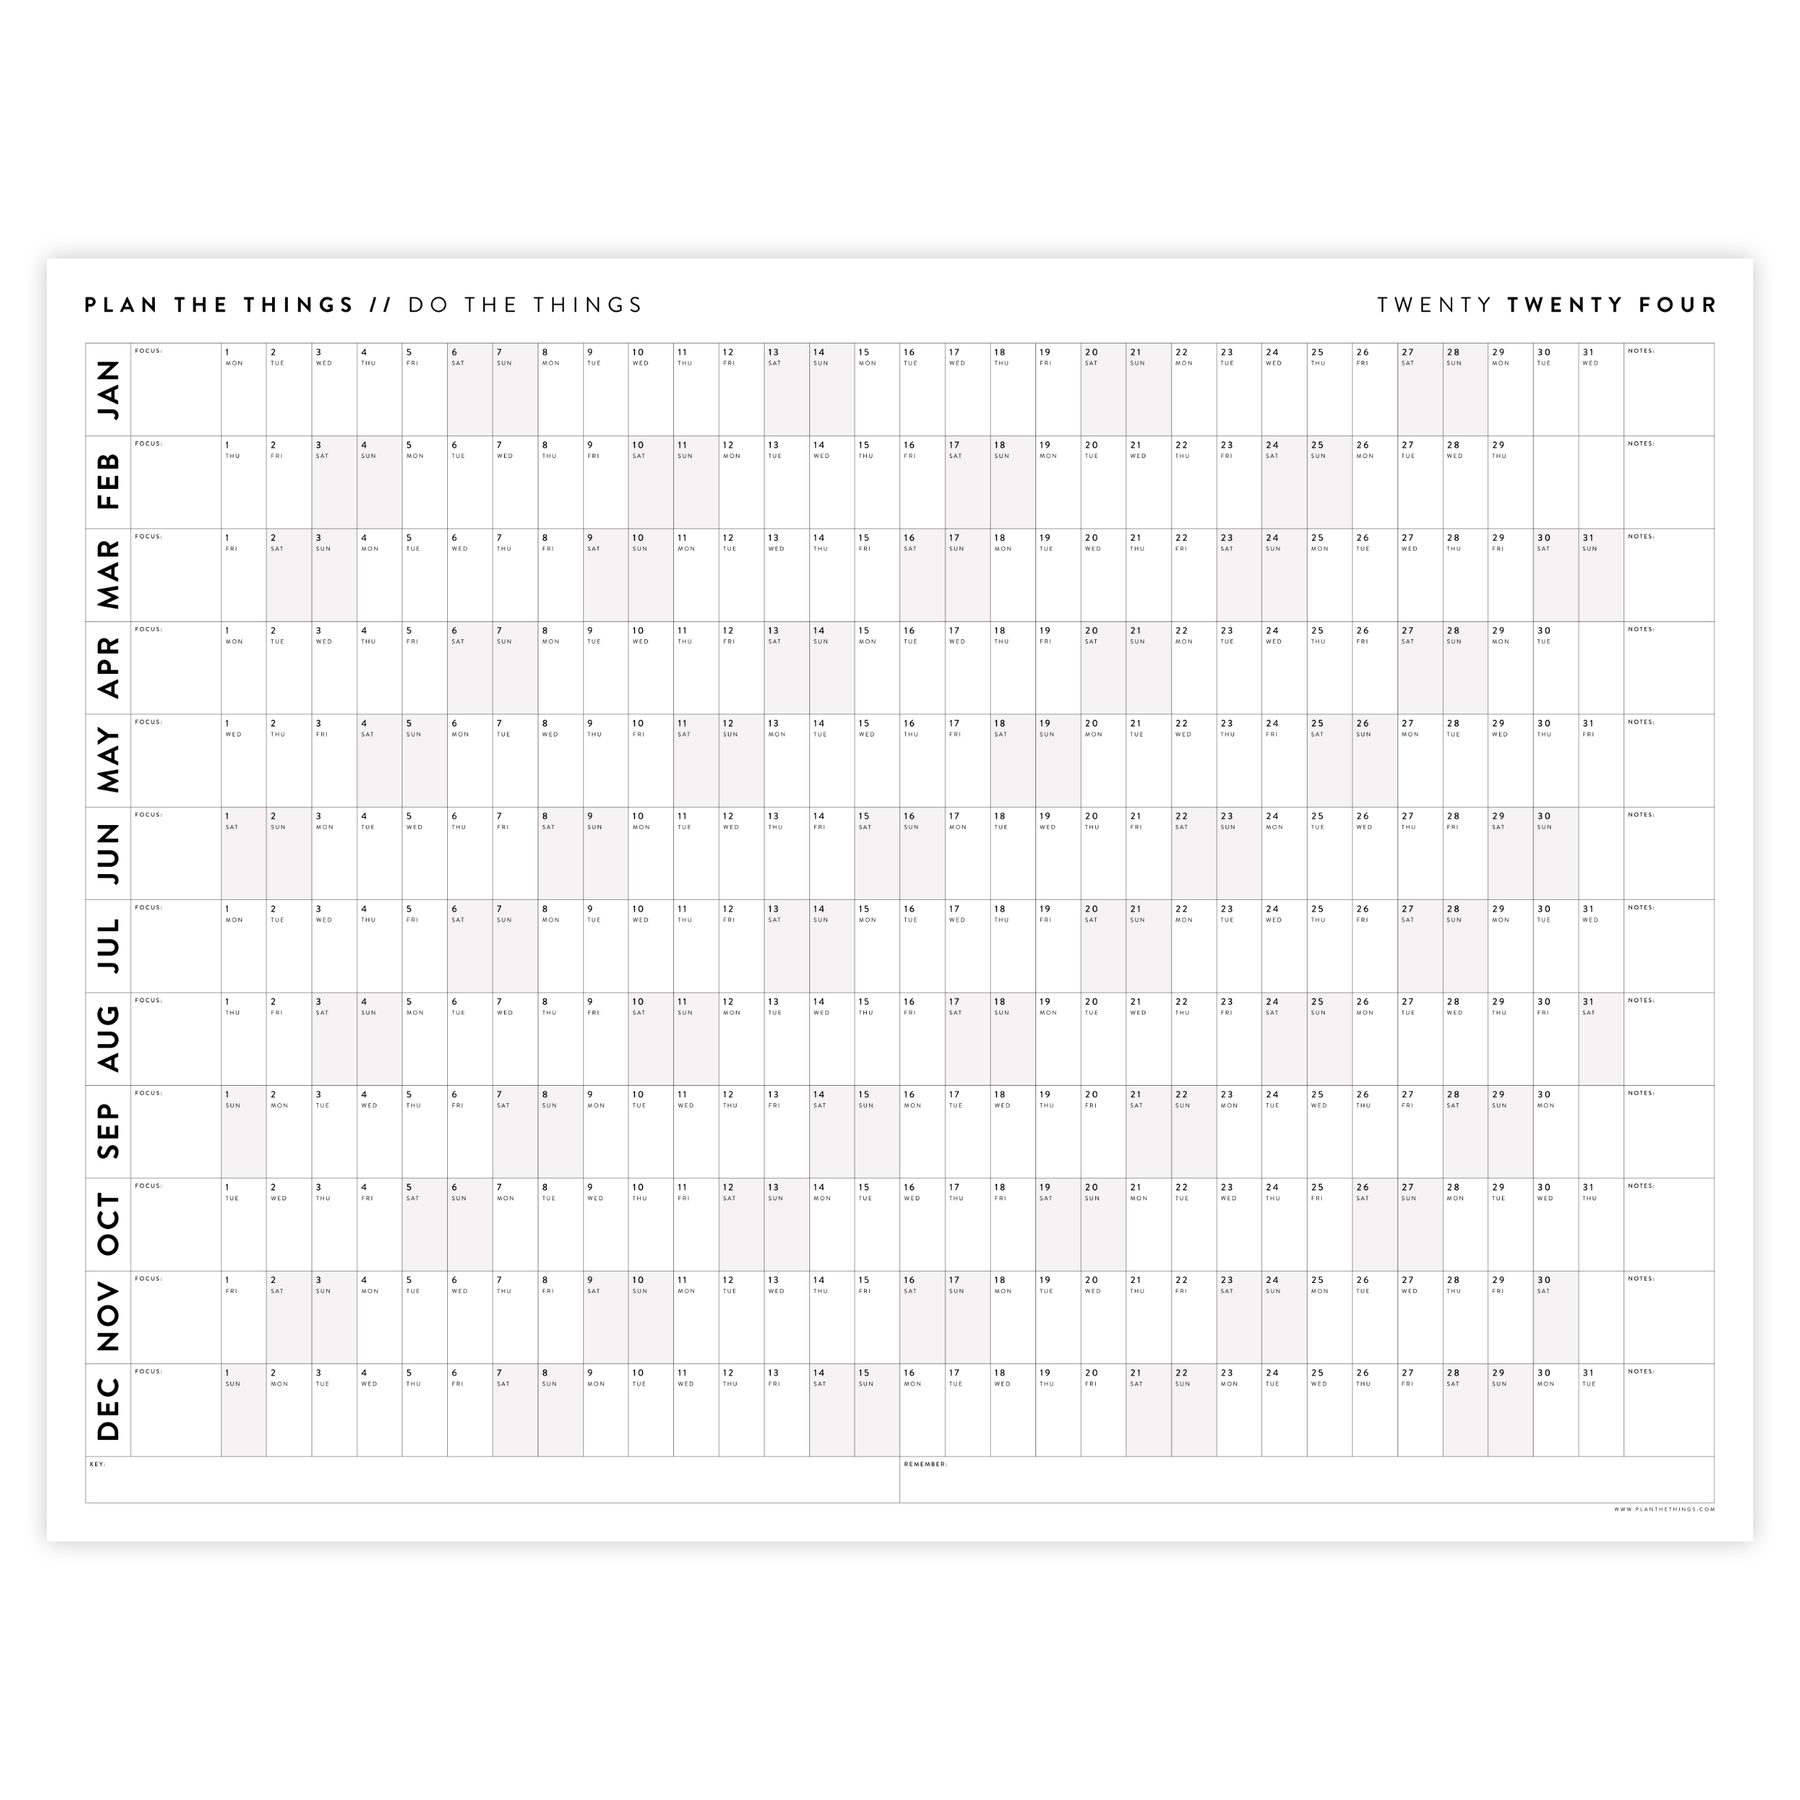 printable-2024-annual-calendars-instant-download-plan-the-things